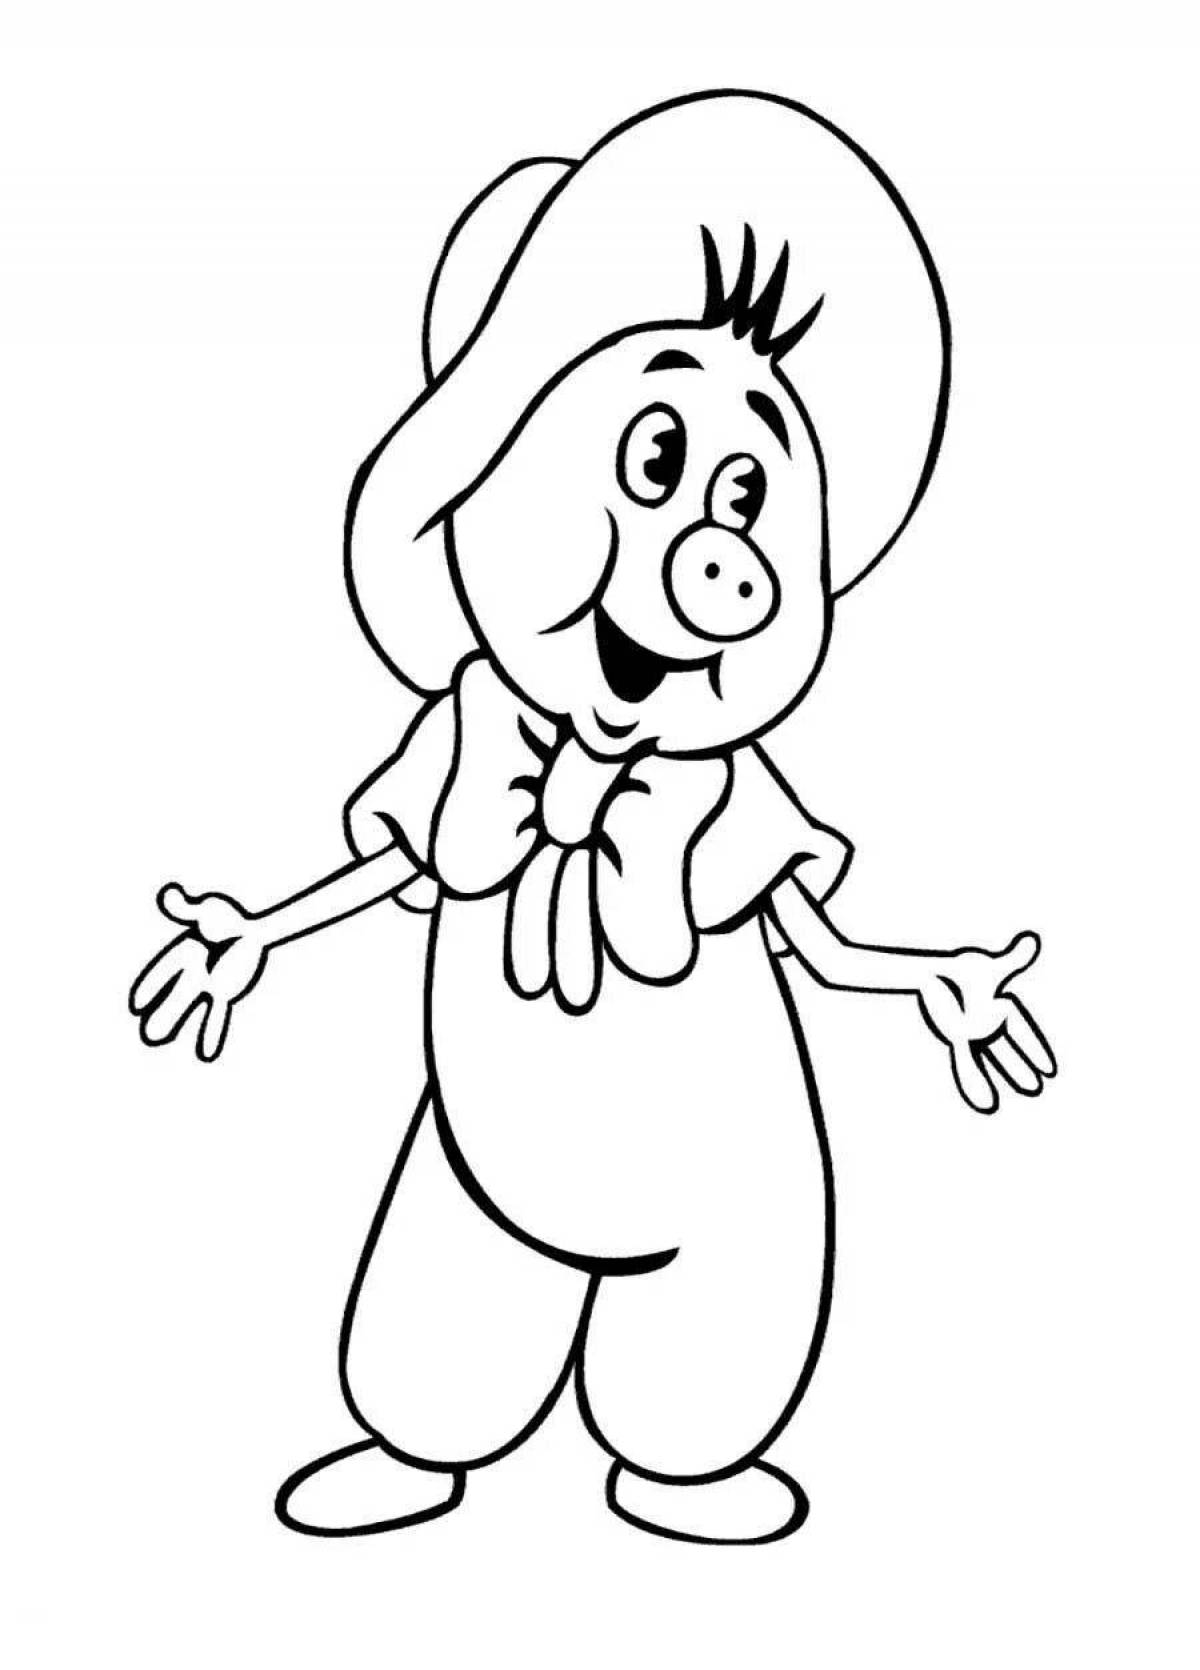 Coloring page of colorful cartoon characters